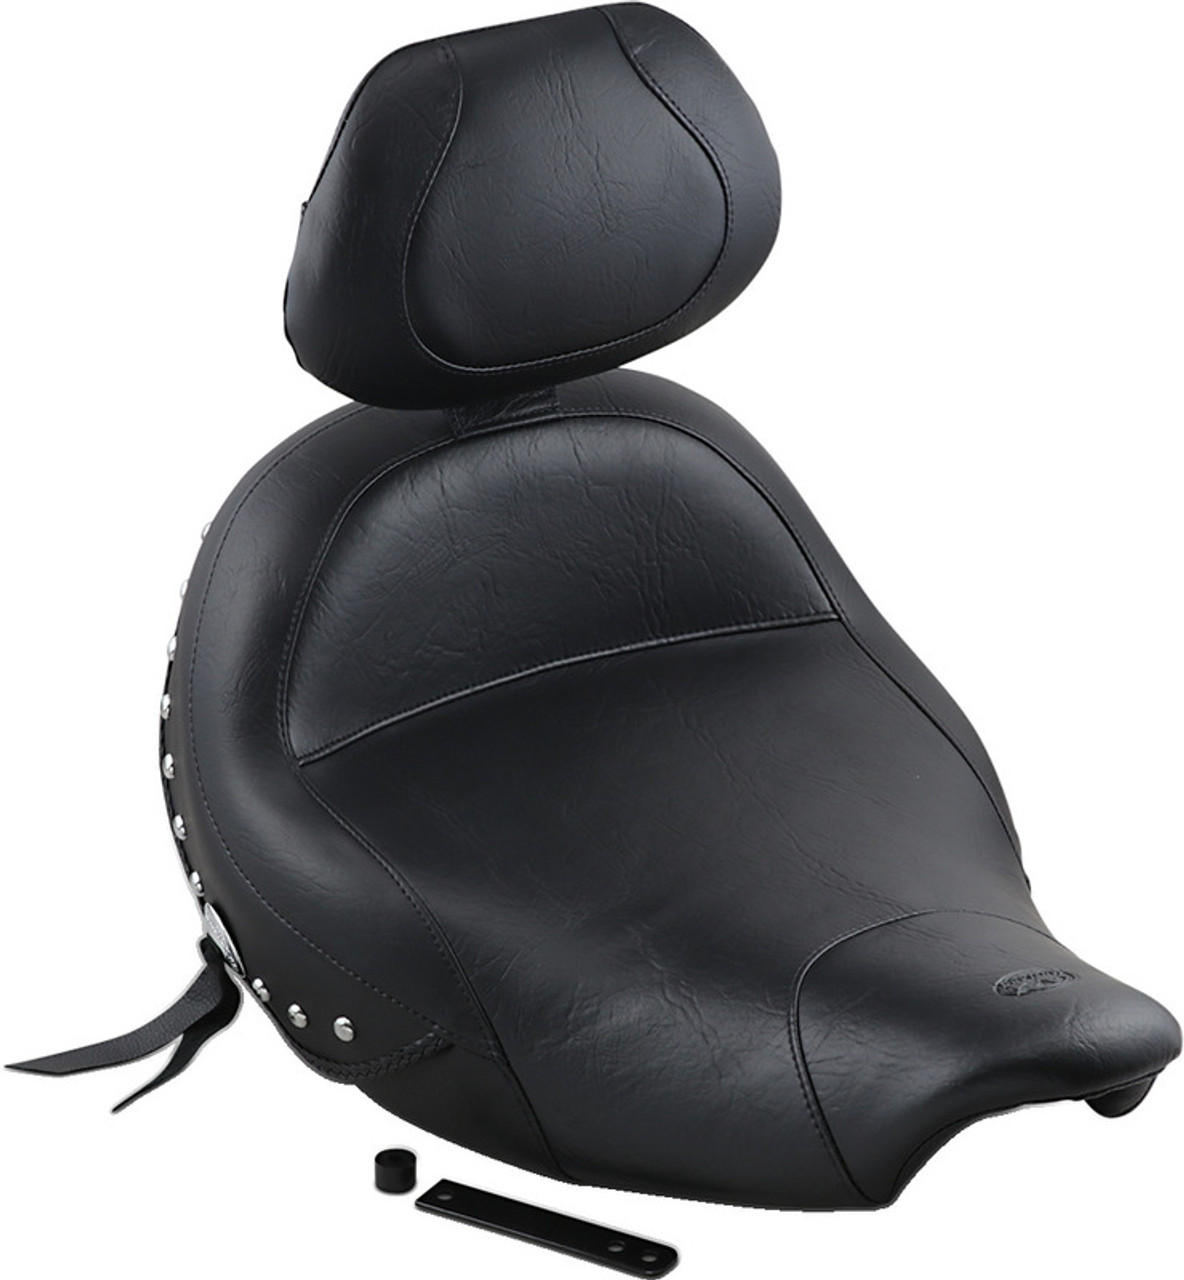 Wide Comfort Seat w/ Backrest Support